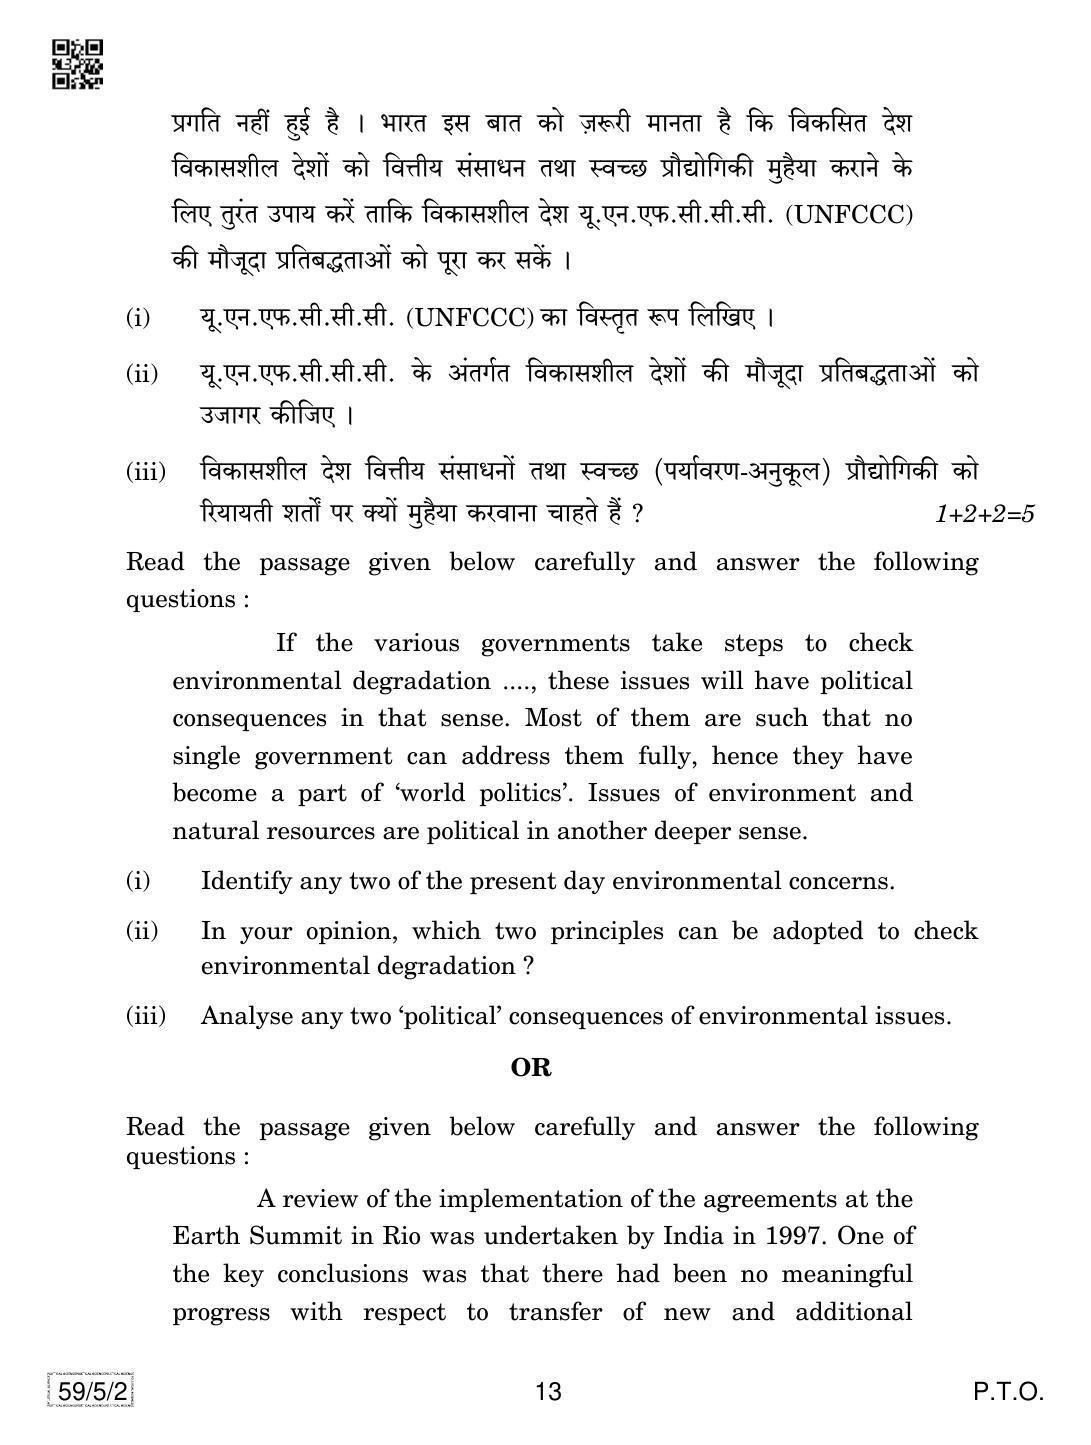 CBSE Class 12 59-5-2 Political Science 2019 Question Paper - Page 13